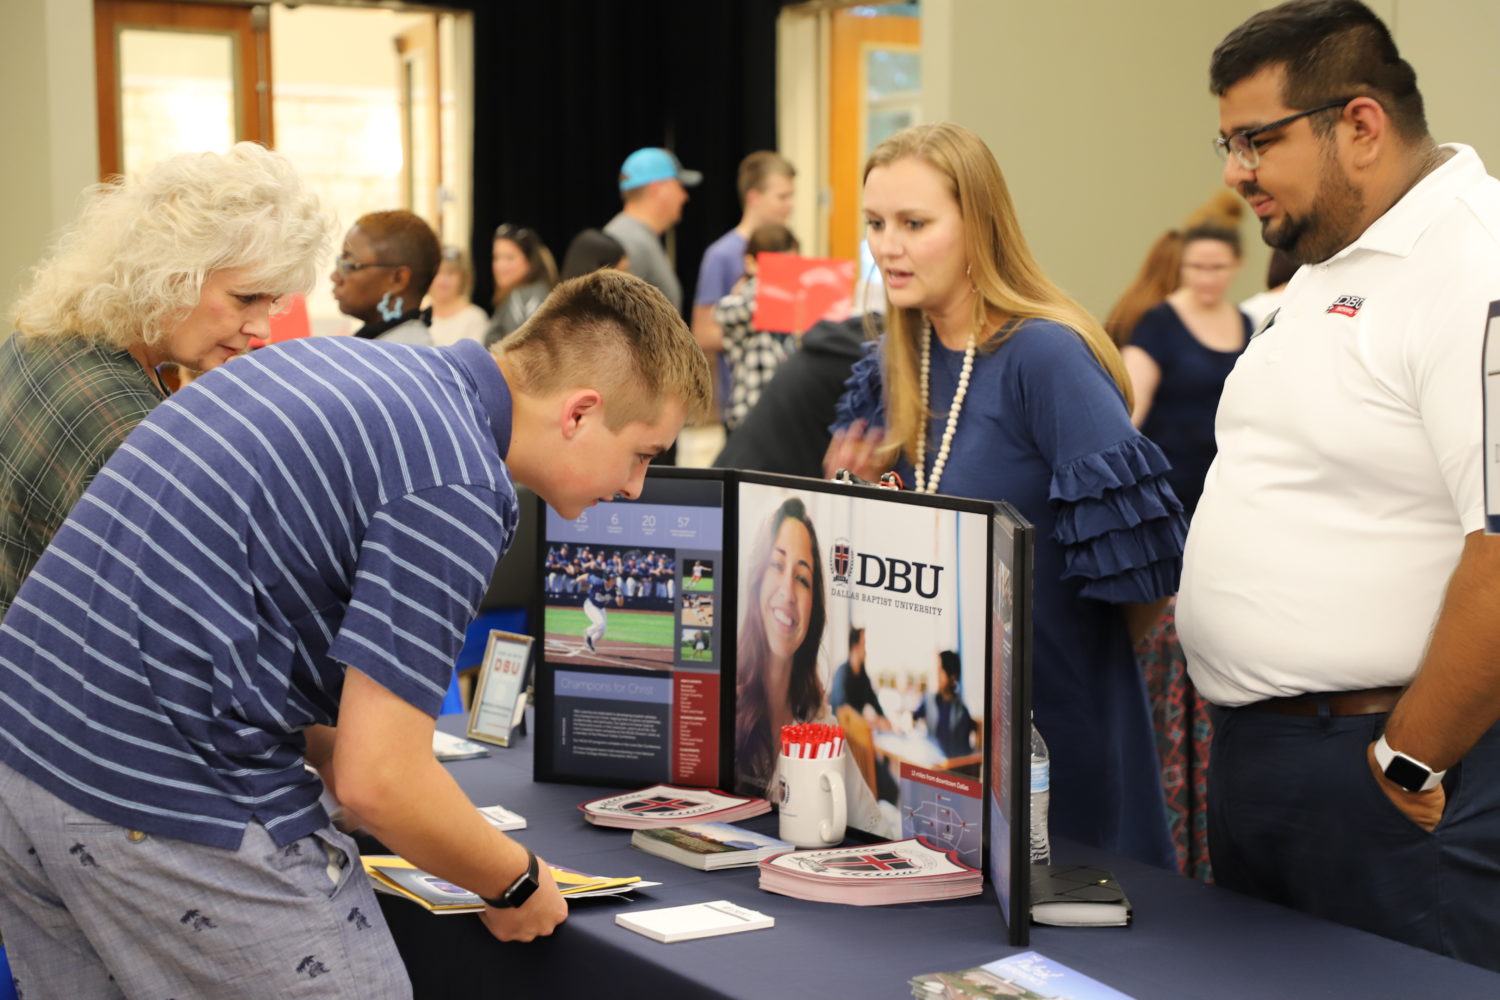 Student learns about opportunities at college night fair.